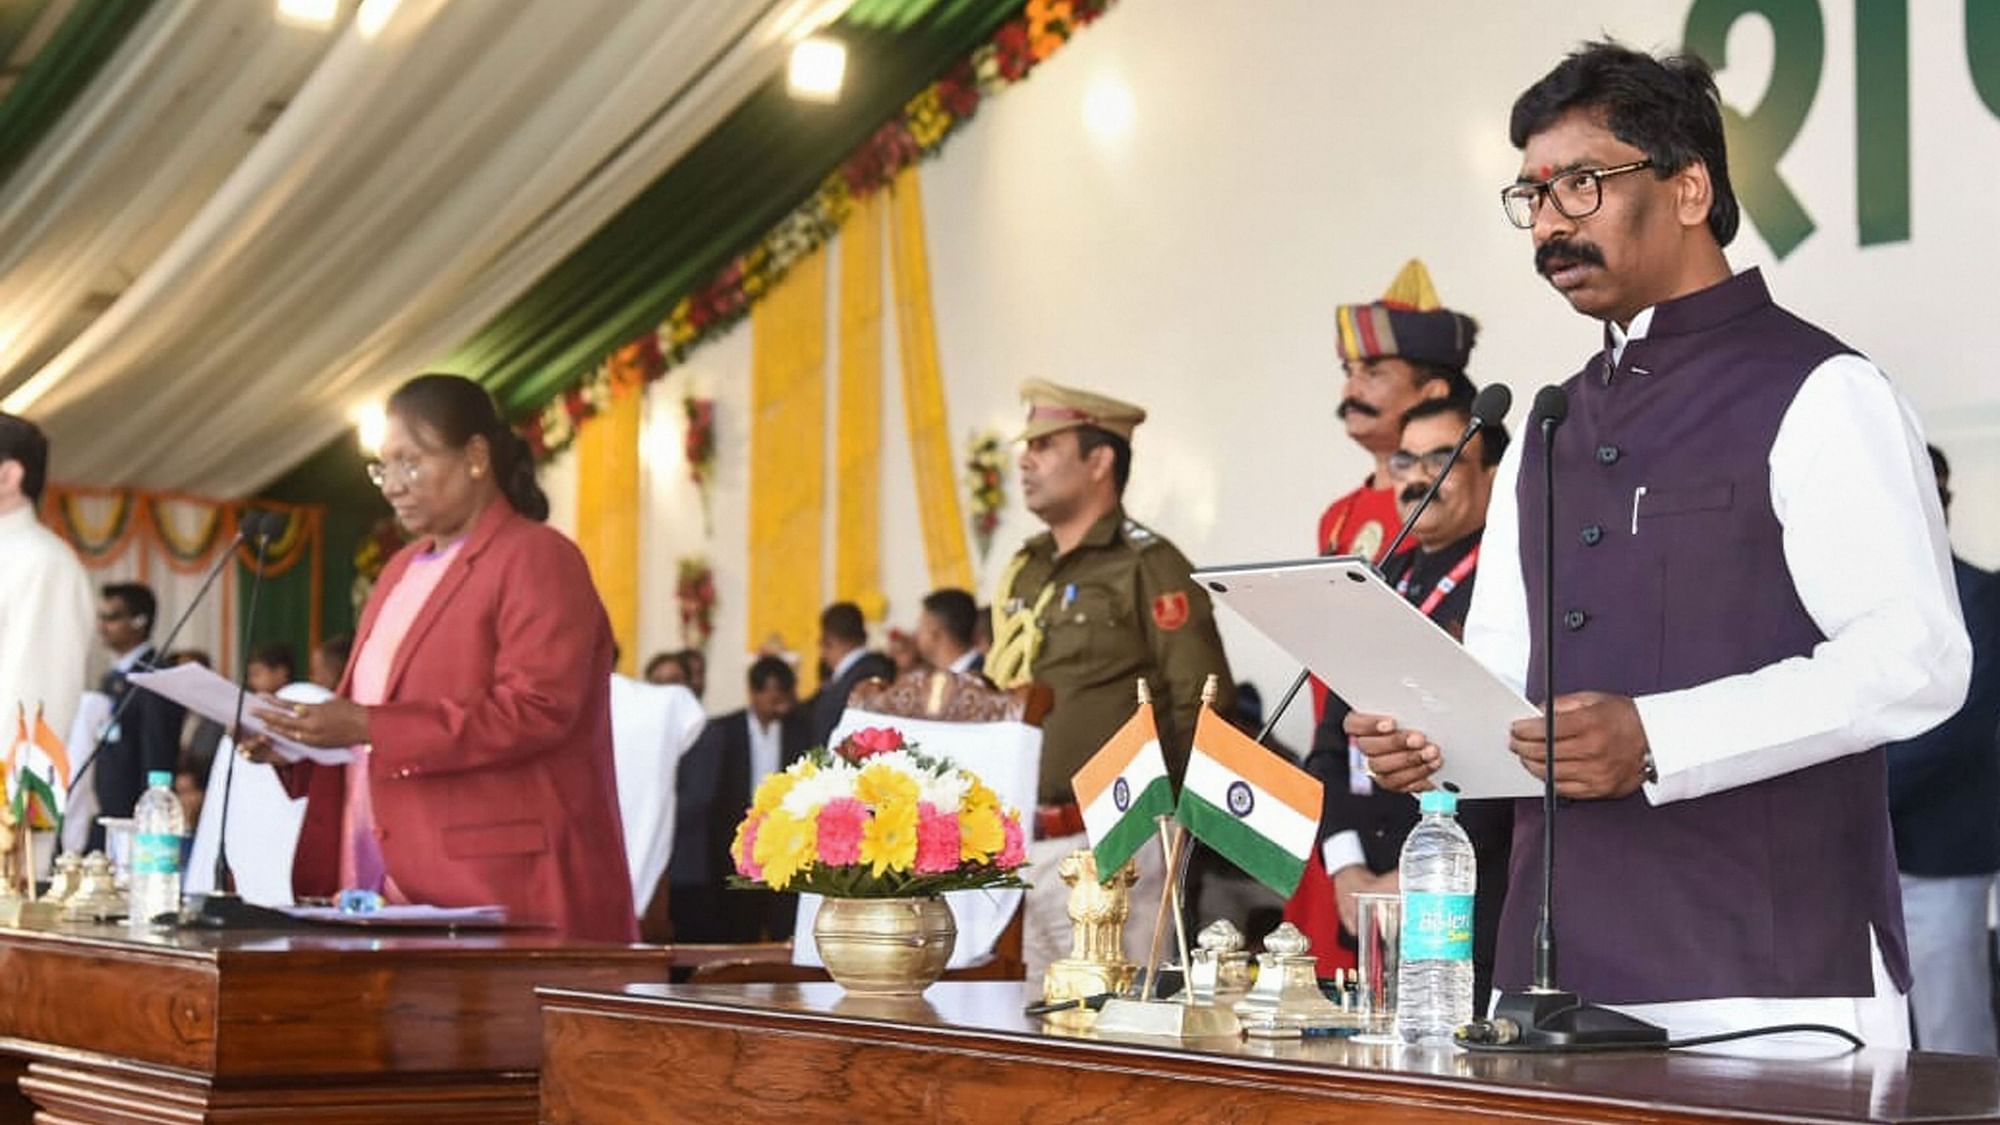 Jharkhand Governor Draupadi Murmu administers the oath of office and secrecy to JMM leader Hemant Soren as Jharkhand chief minister.&nbsp;